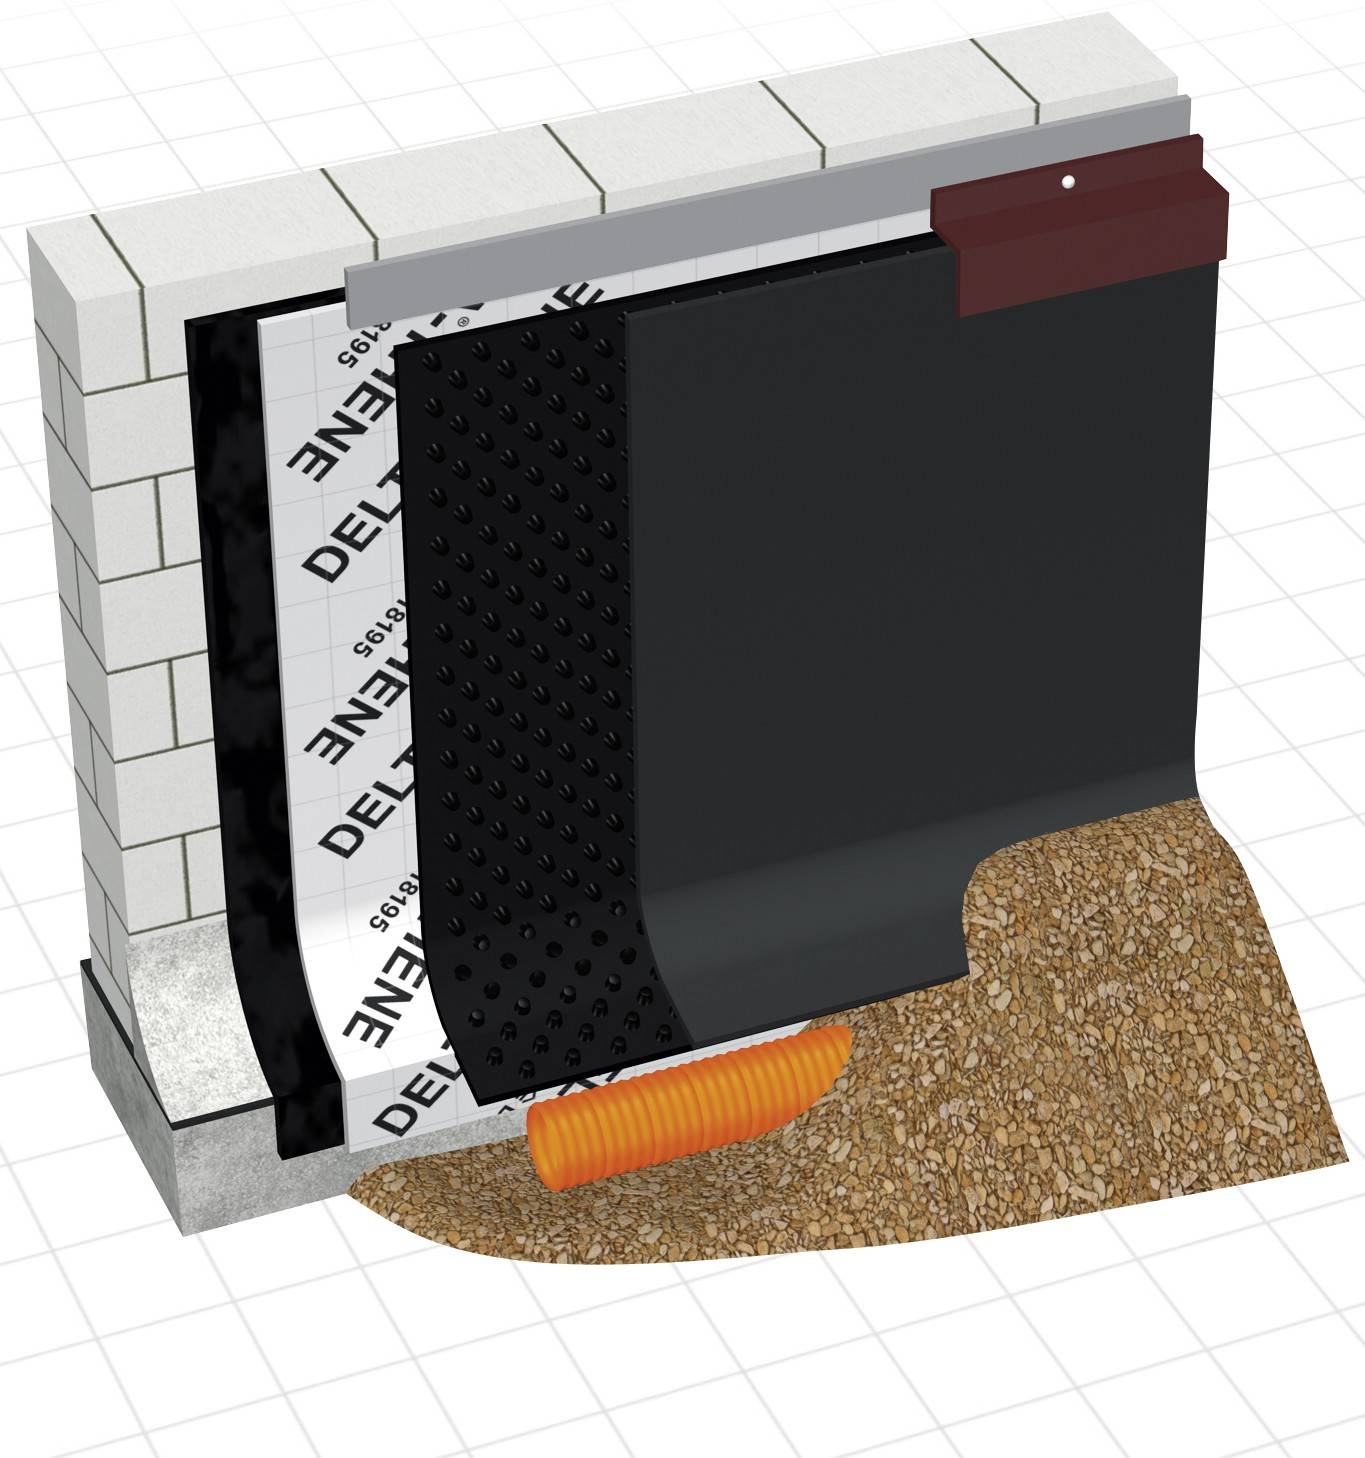 DELTA® EQ Drain - Protection and drainage system